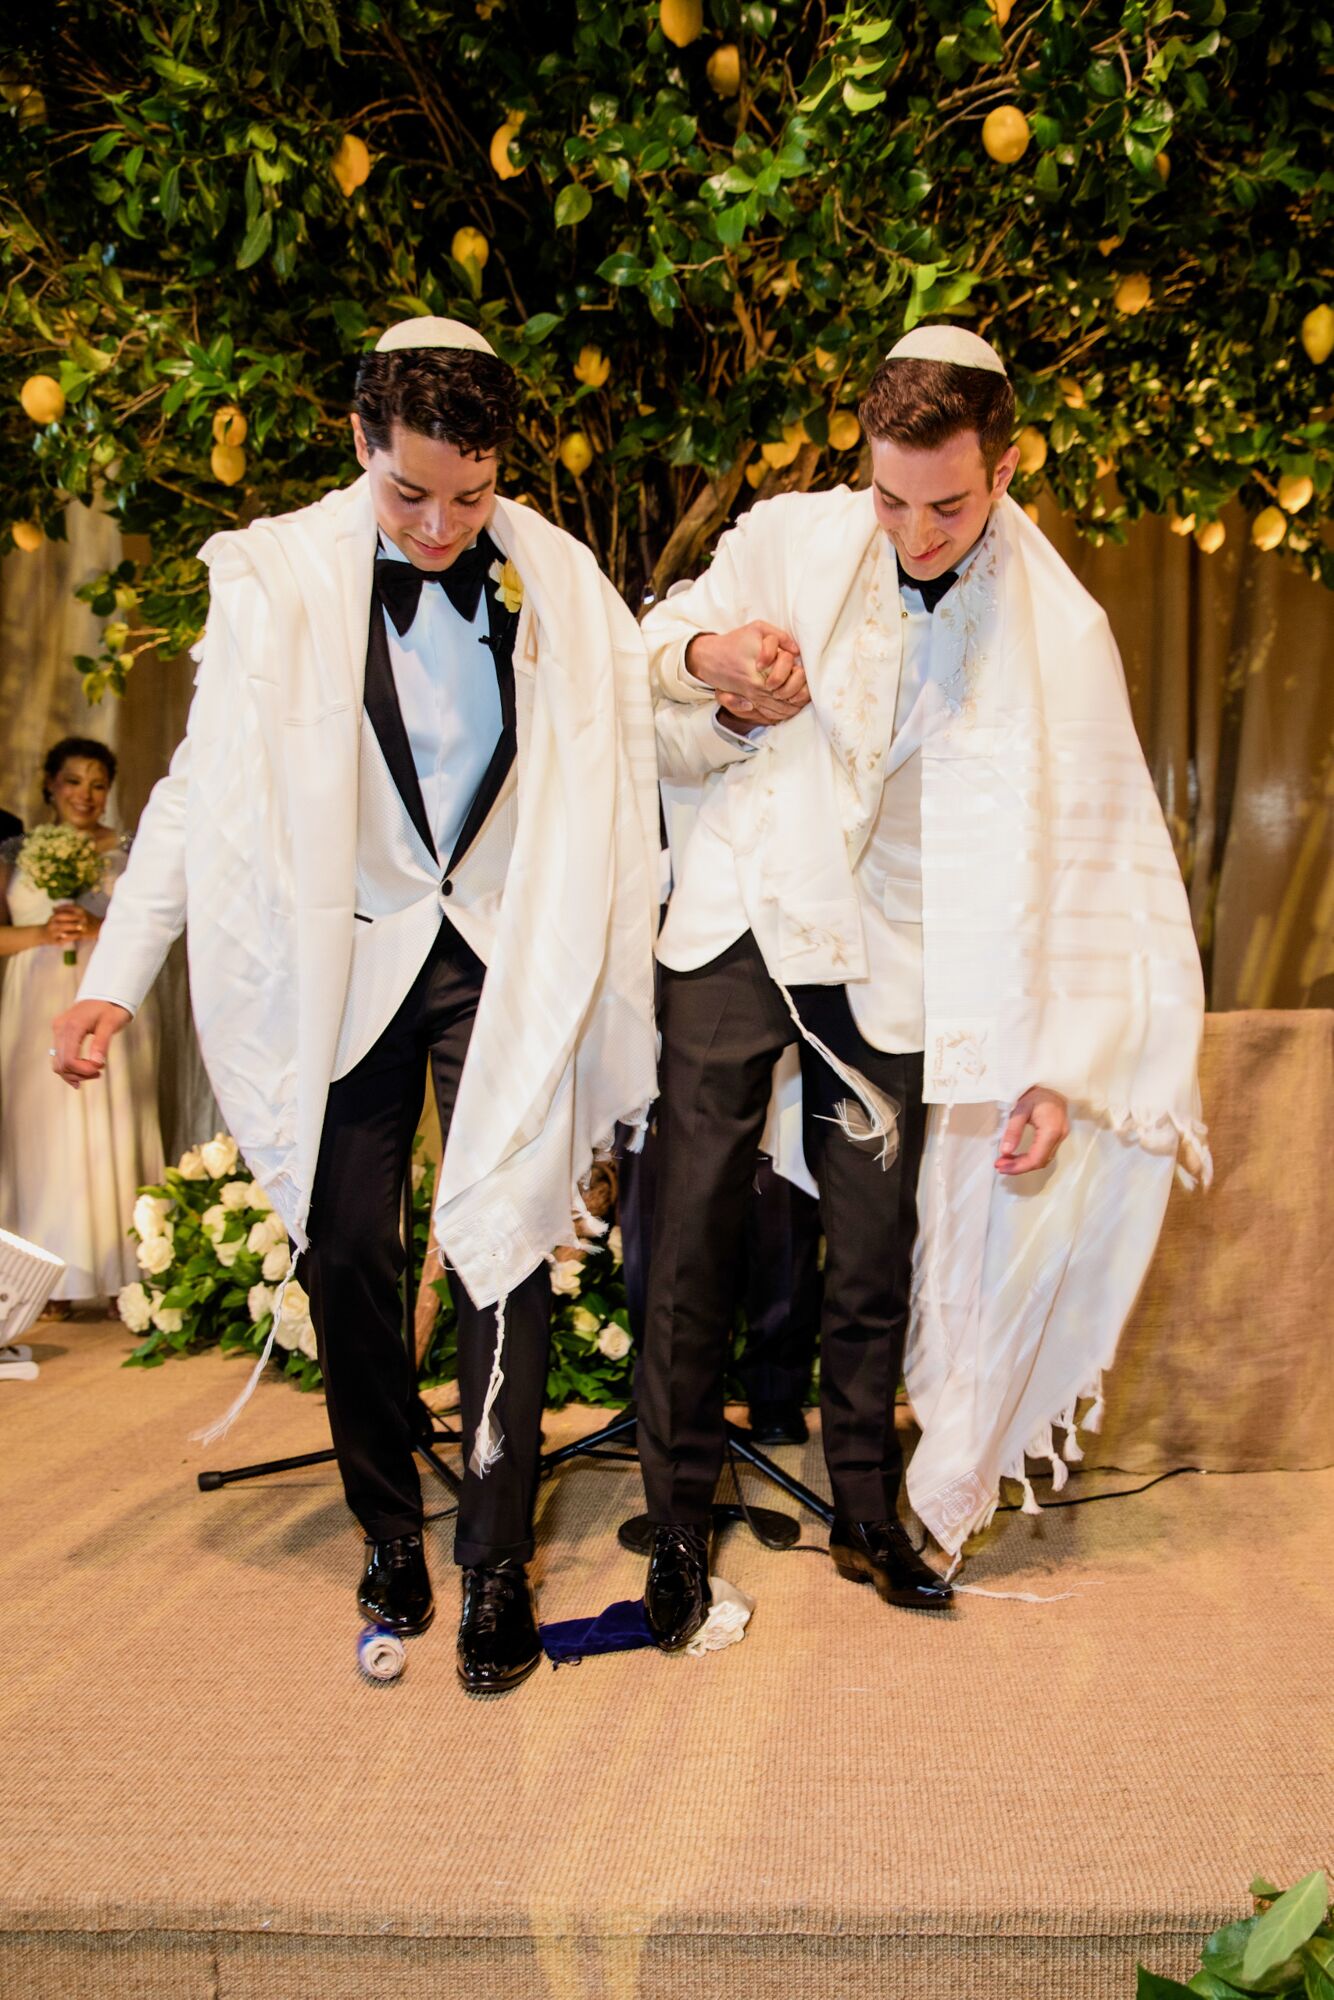 A Modern Orthodox Jewish Wedding at the Parrish Art Museum in Water Mill, New York pic